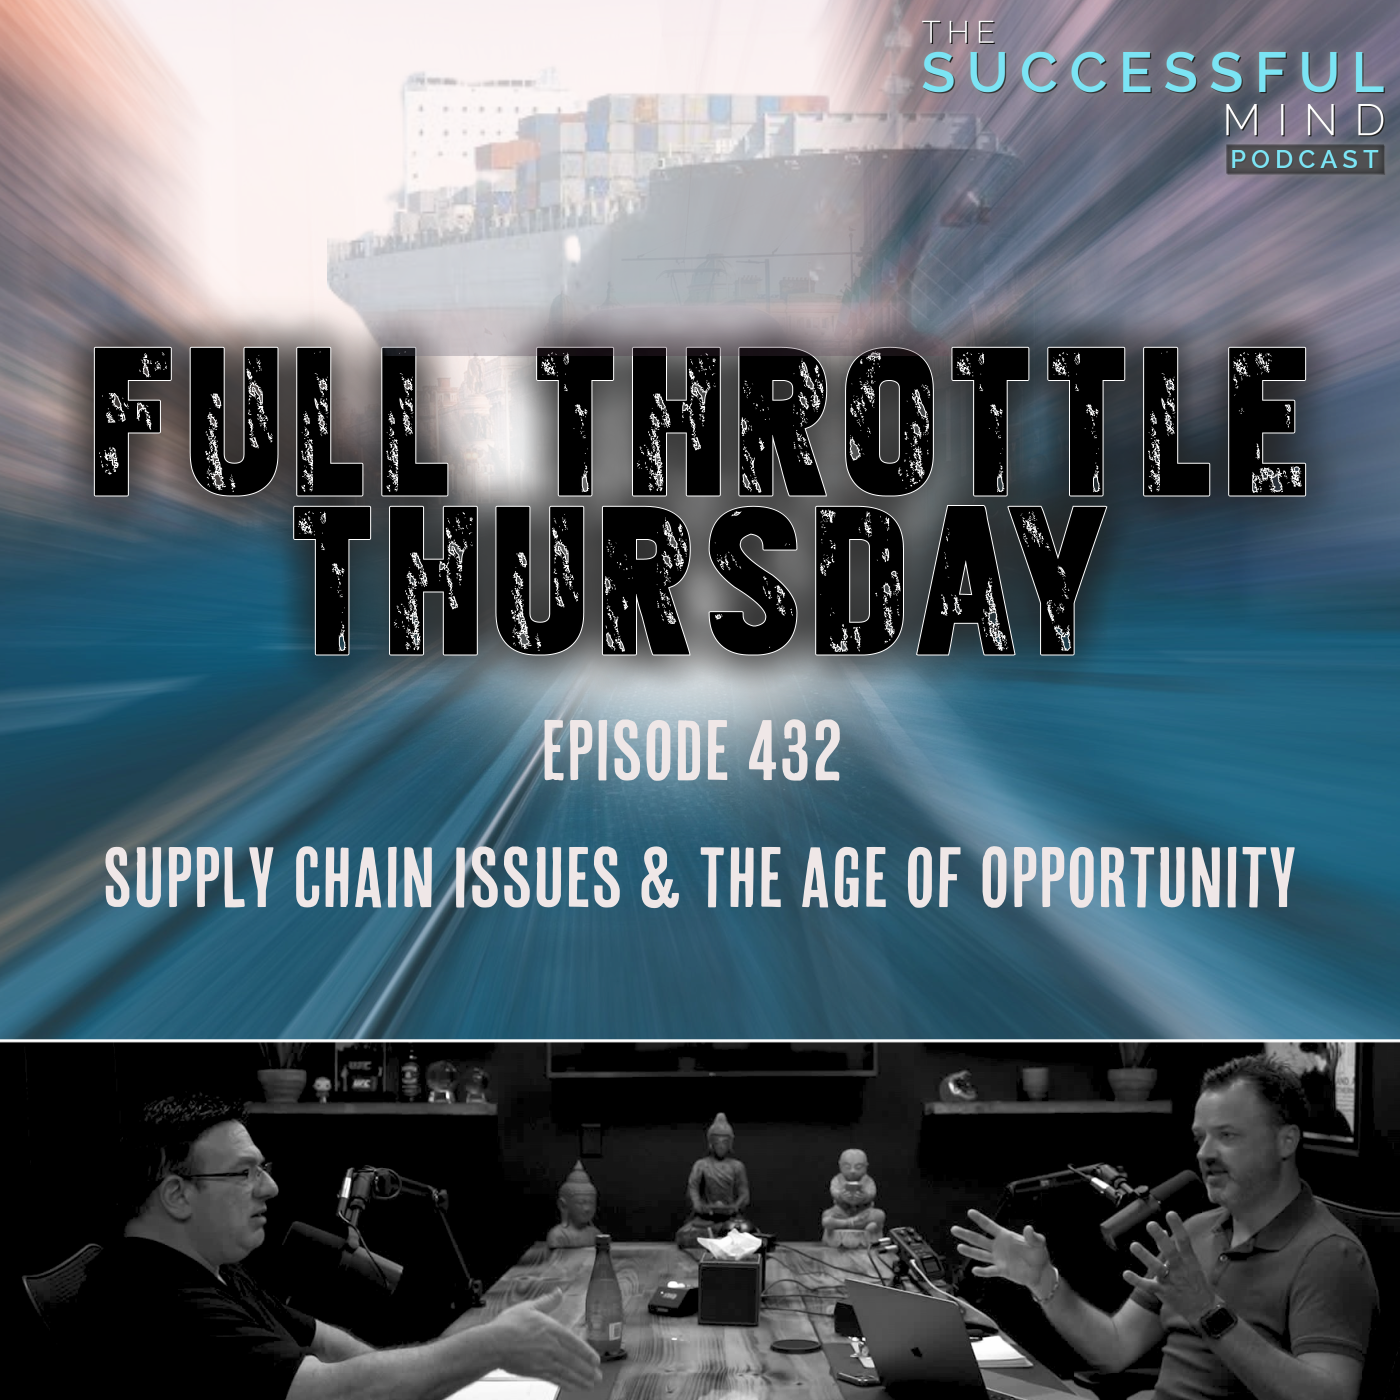 The Successful Mind Podcast - Full Throttle Thursday - Supply Chain Issues & The Age of Opportunity